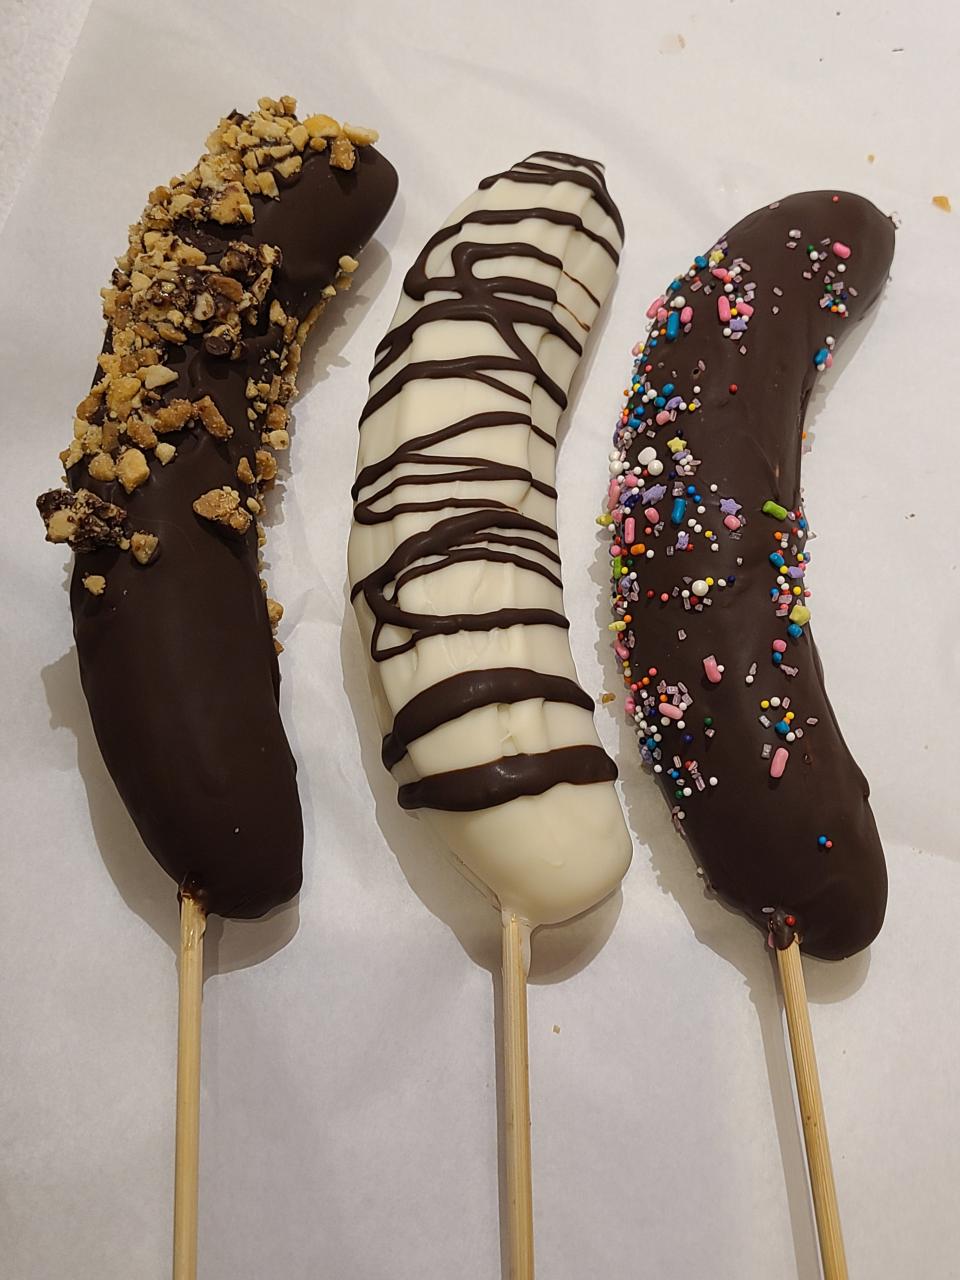 Those craving something healthy and sweet can look no further than Funky Flamingo’s Dipped Fruit, located between the Taste of Ohio Café and the Mountain Dew Midway.